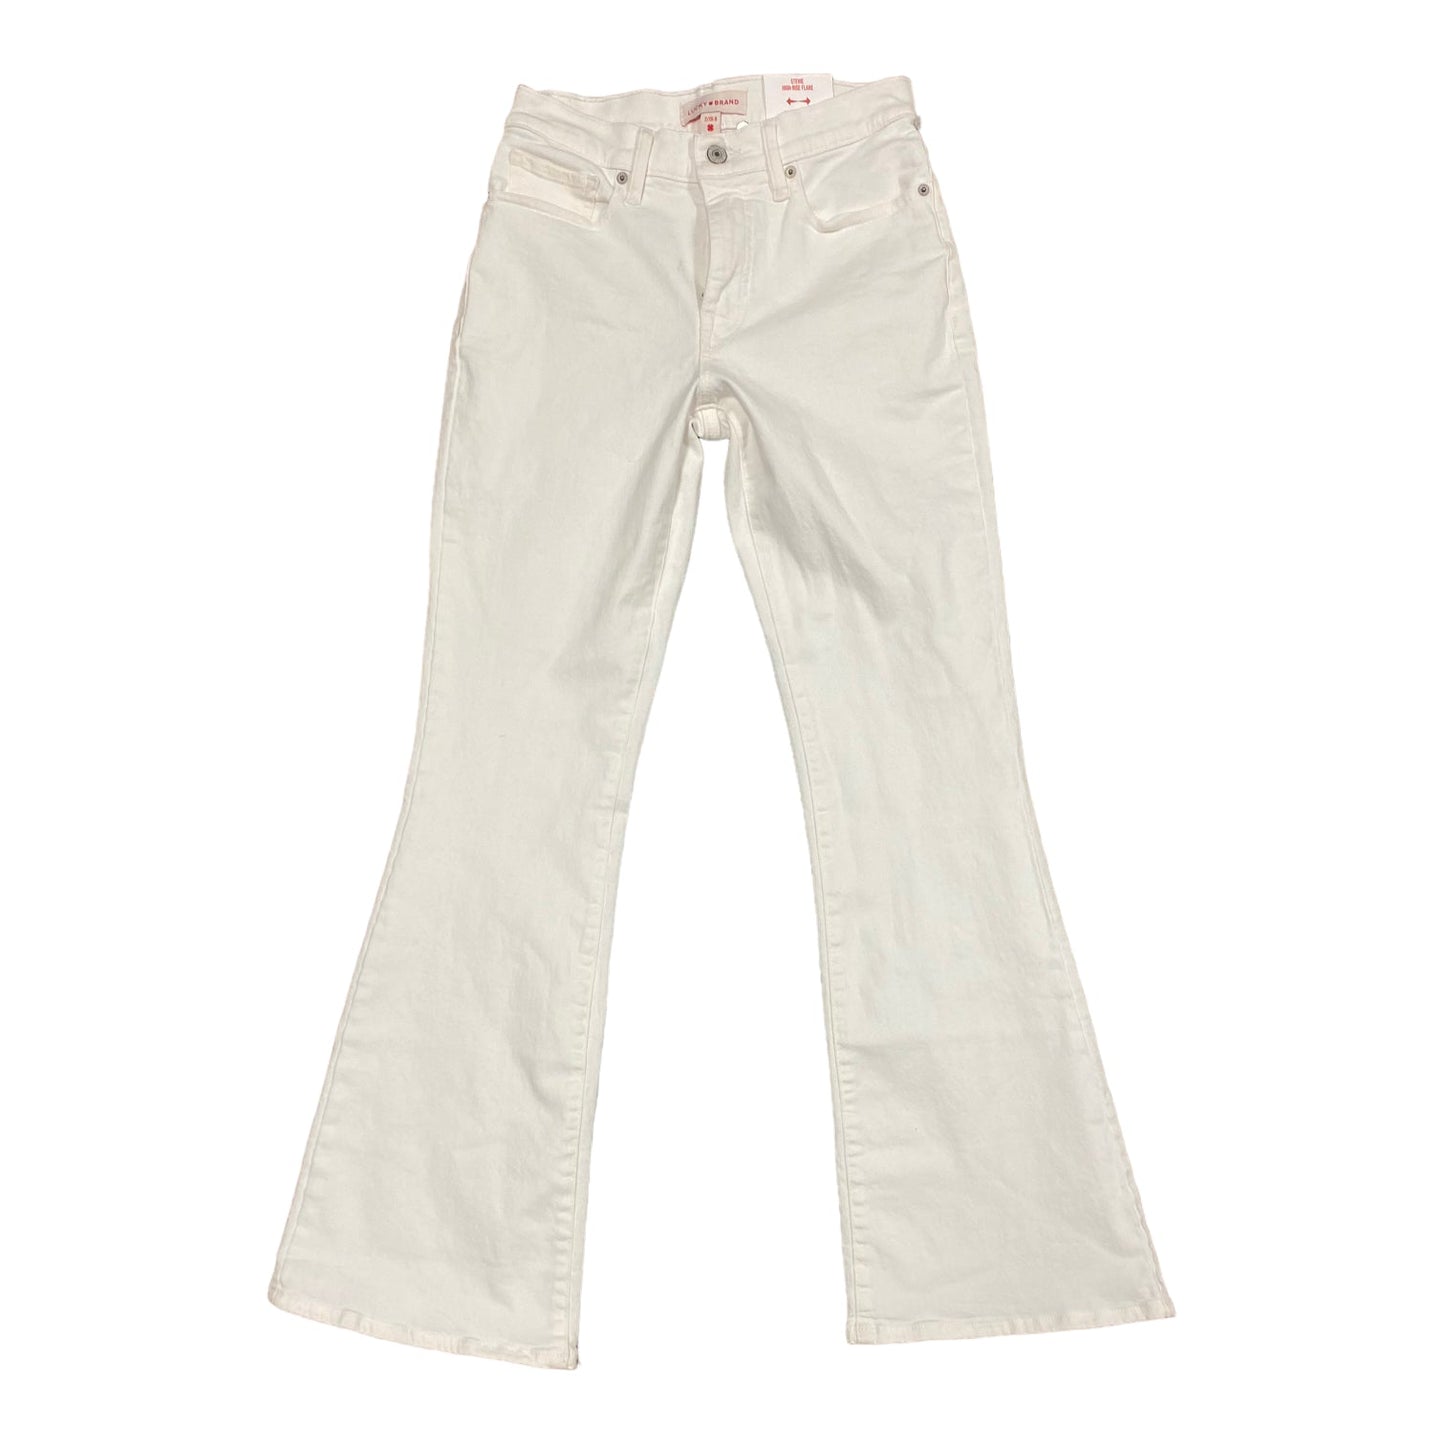 White Jeans Flared Lucky Brand, Size 2